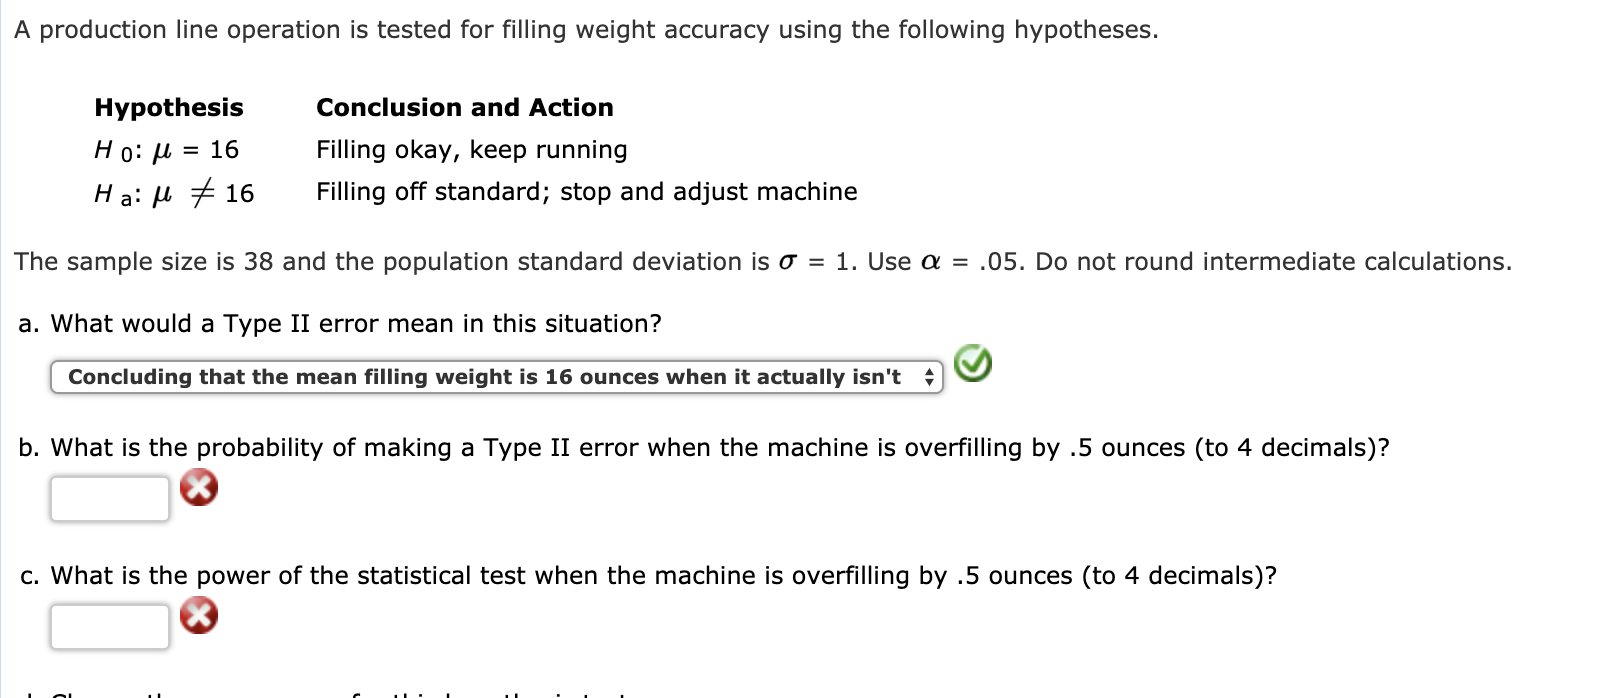 A production line operation is tested for filling weight accuracy using the following hypotheses.
Hypothesis
H 0: μ-16
H a: μ 16
Conclusion and Action
Filling okay, keep running
Filling off standard; stop and adjust machine
The sample size is 38 and the population standard deviation is σ = 1 . Use α = .05. Do not round intermediate calculations.
a. What would a Type II error mean in this situation?
Concluding that the mean filling weight is 16 ounces when it actually isn't
b. What is the probability of making a Type II error when the machine is overfilling by .5 ounces (to 4 decimals)?
c. What is the power of the statistical test when the machine is overfilling by .5 ounces (to 4 decimals)?
